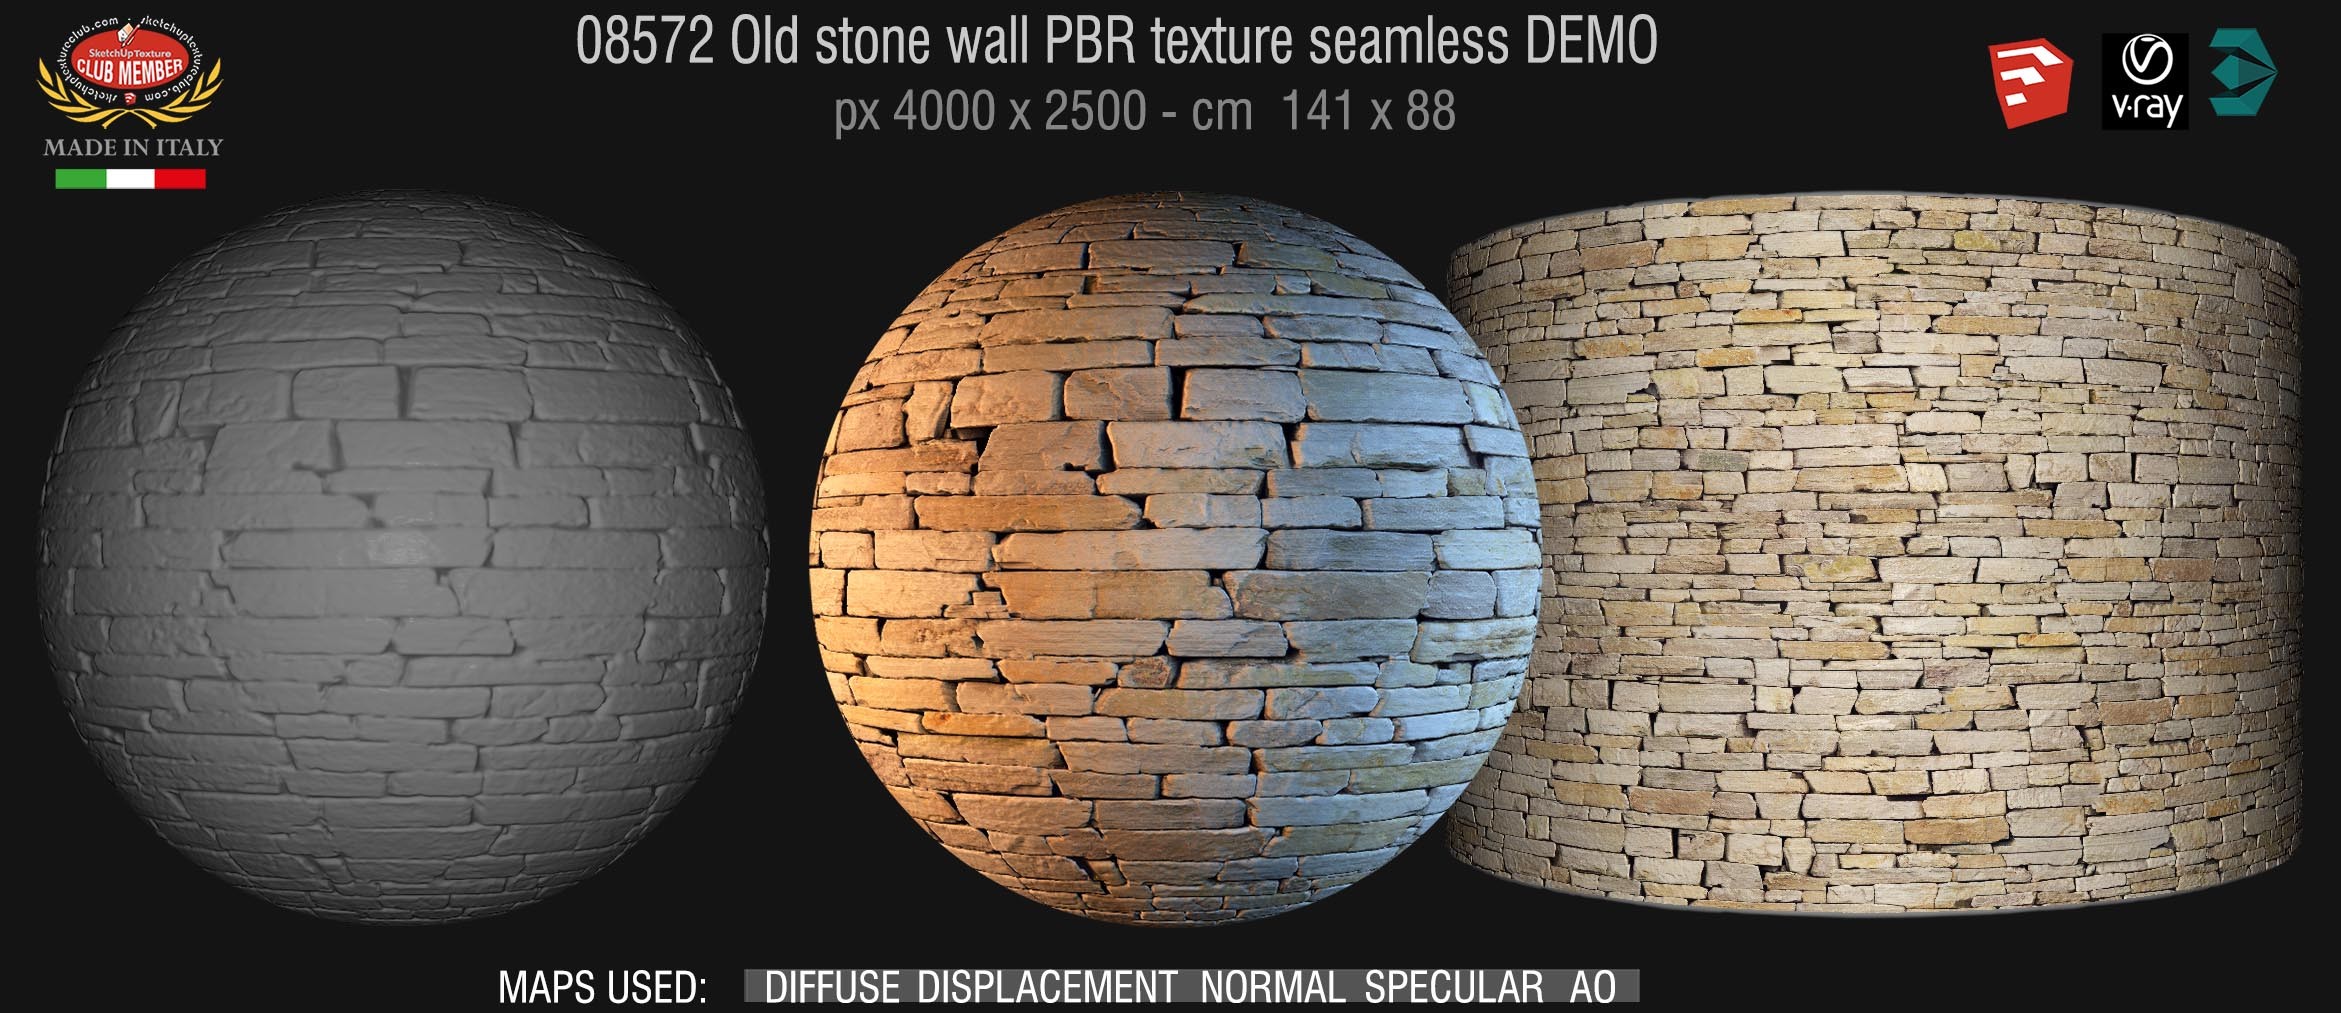 08572 Old stone wall PBR texture seamless DEMO